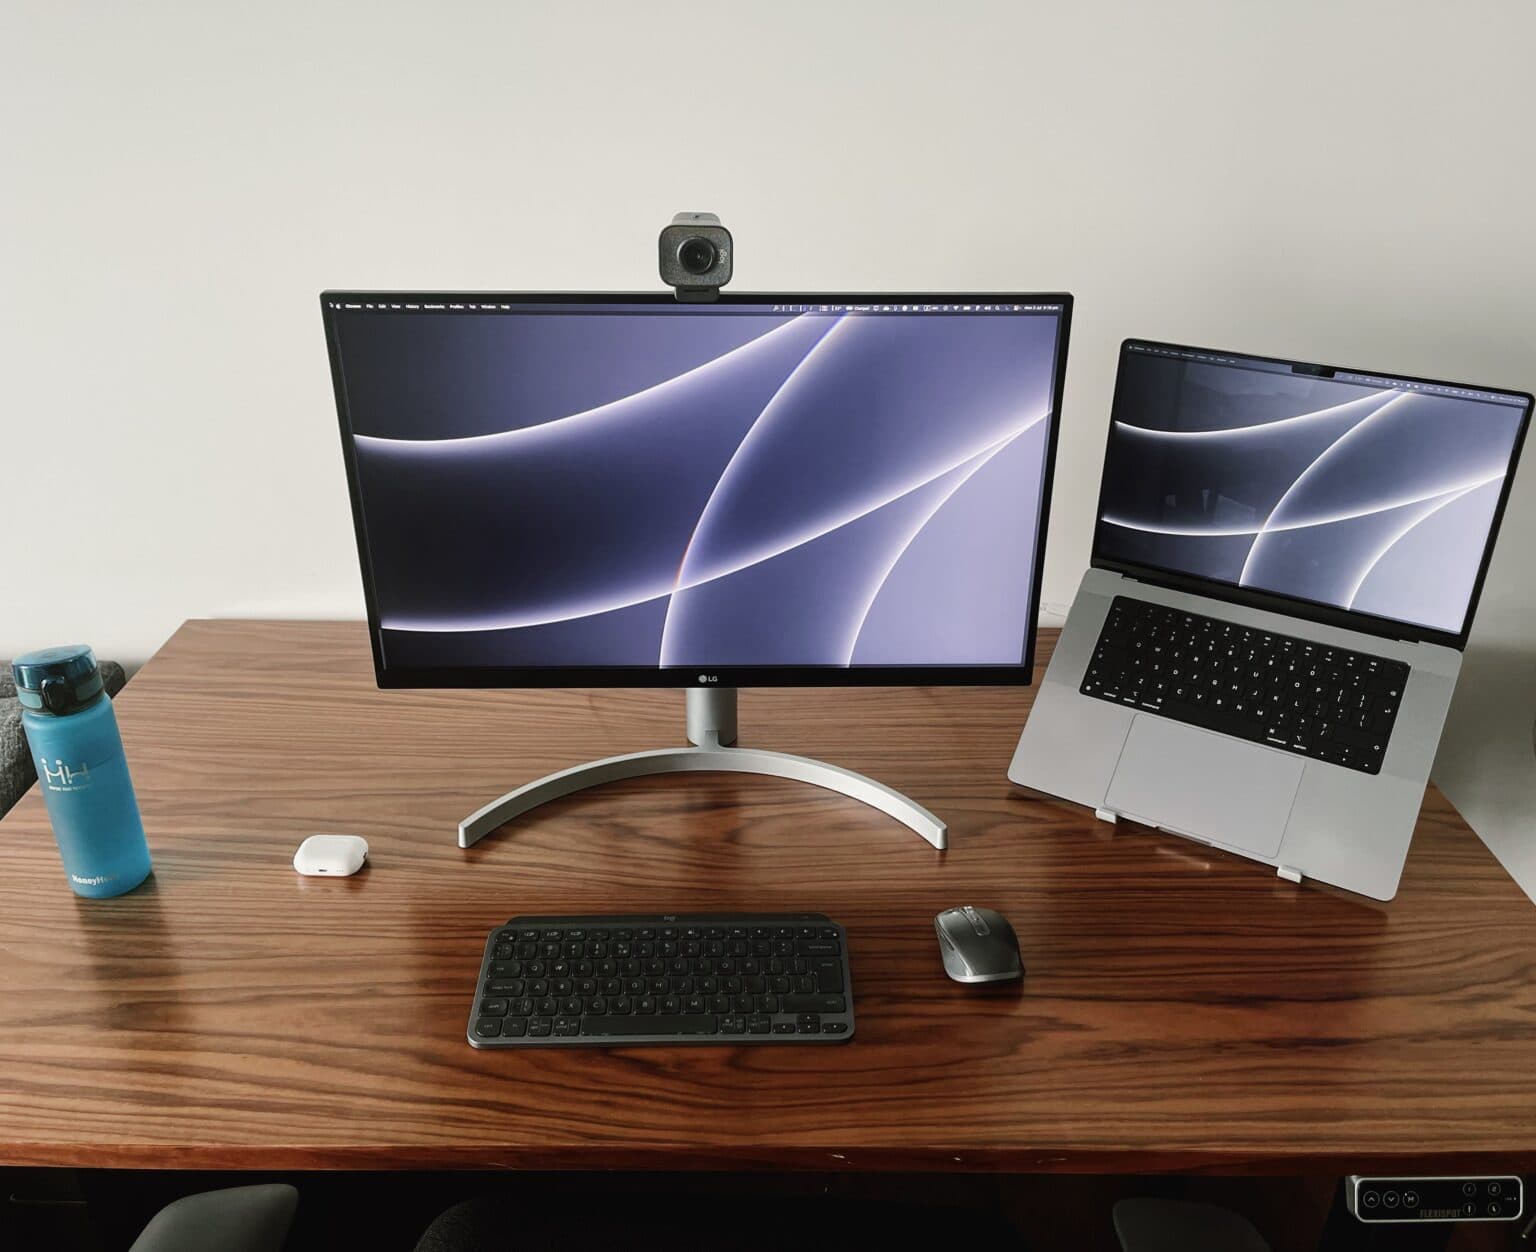 Even if you have a lot more gear than this, a standing desk can make a world of difference.